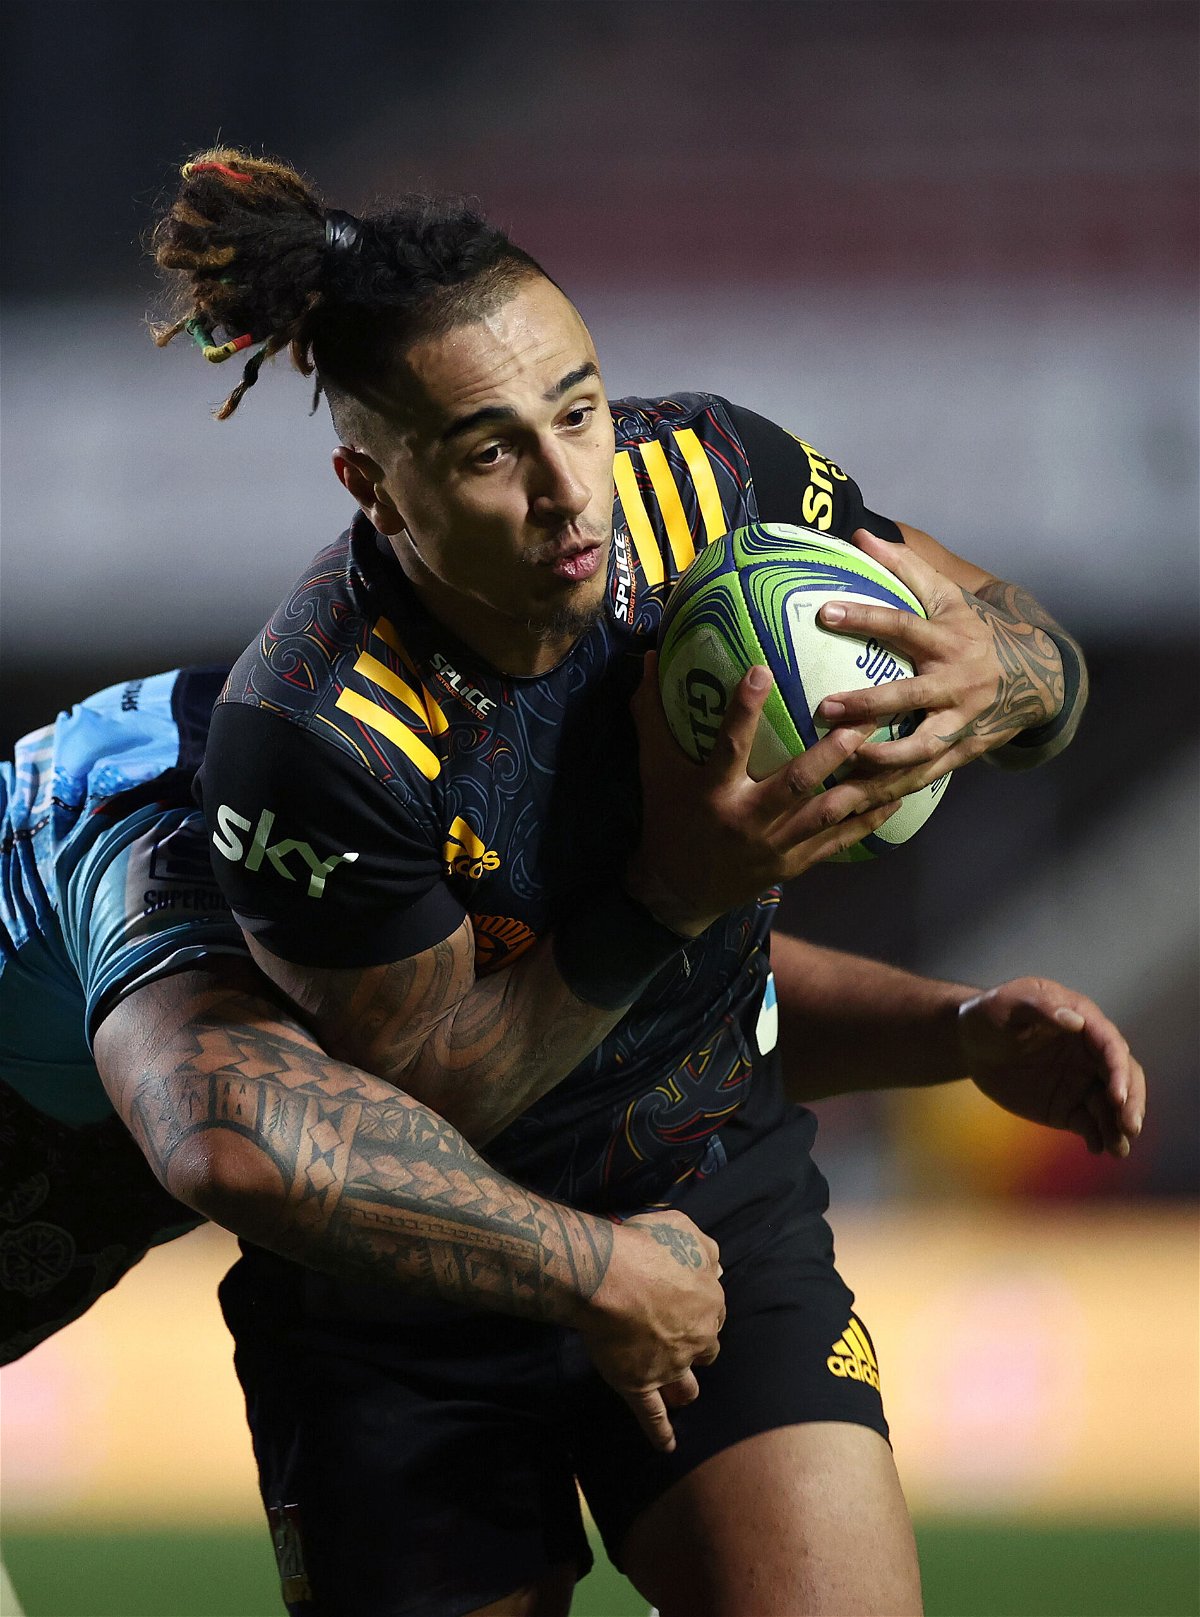 <i>Cameron Spencer/Getty Images</i><br/>Sean Wainui of the Chiefs is tackled during the round five Super Rugby Trans-Tasman match between the NSW Waratahs and the Chiefs at Brookvale Oval on June 12